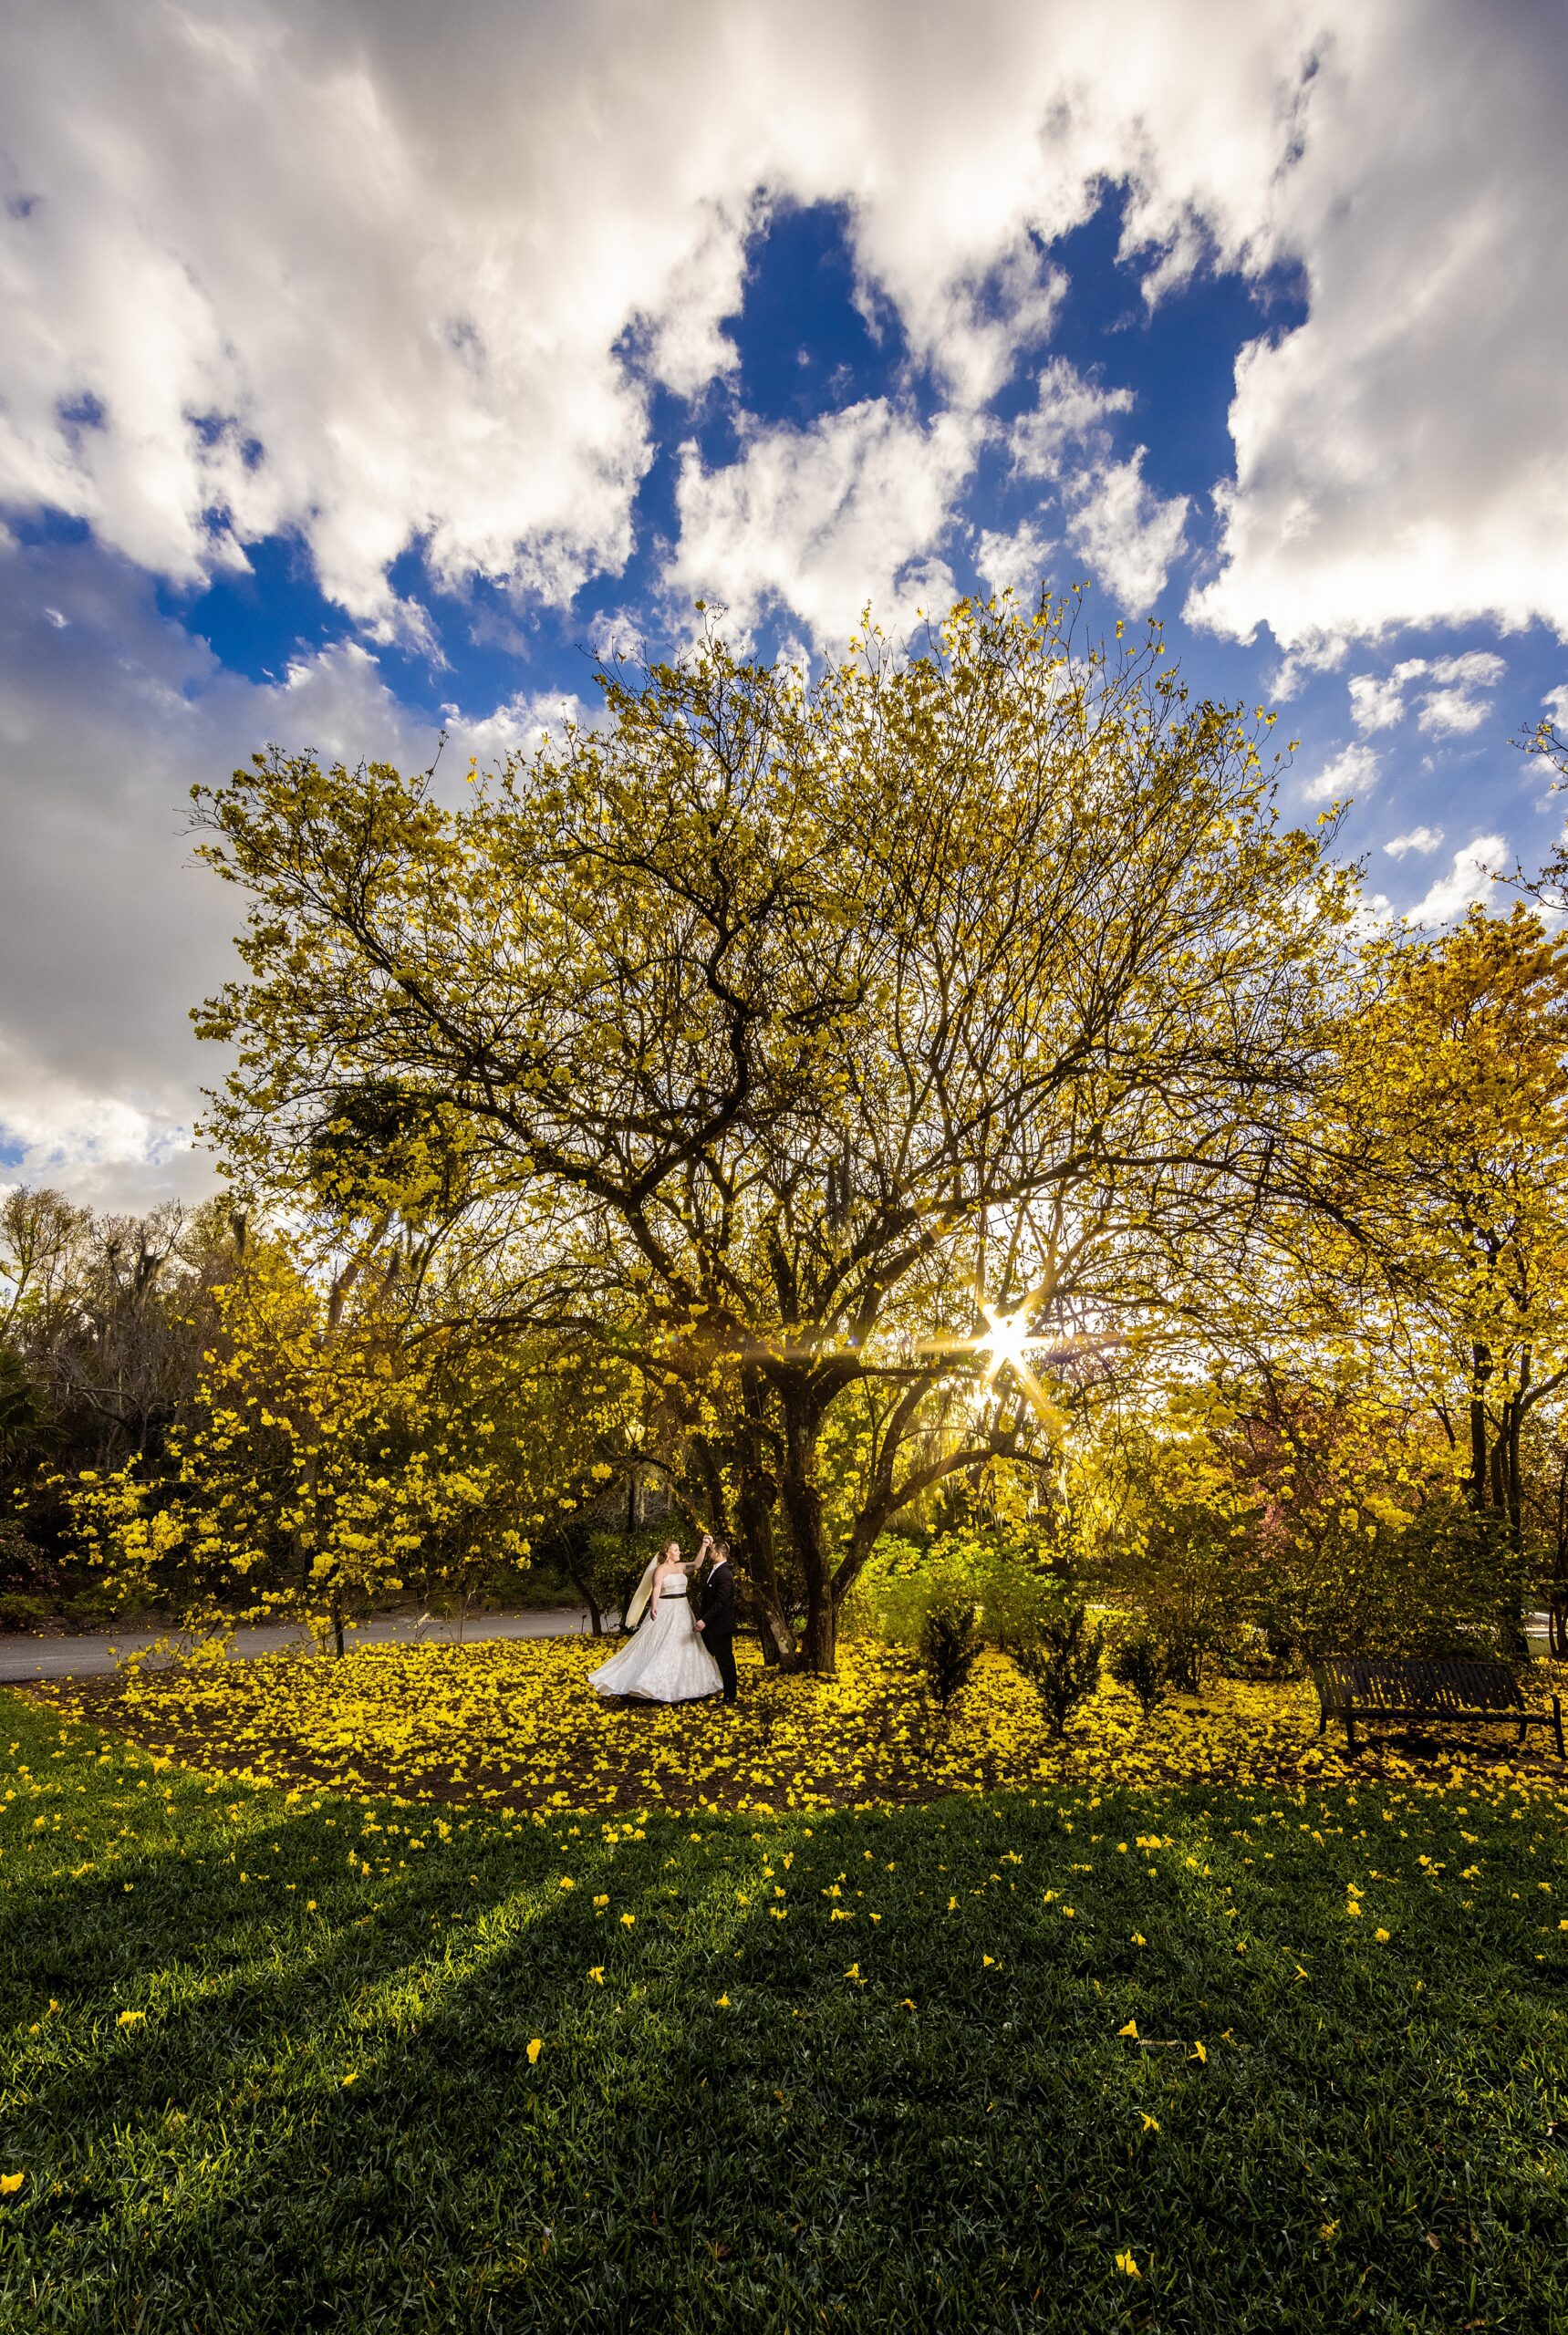 Newlyweds stand under a tree dropping large yellow leaves at sunset during their leu gardens wedding